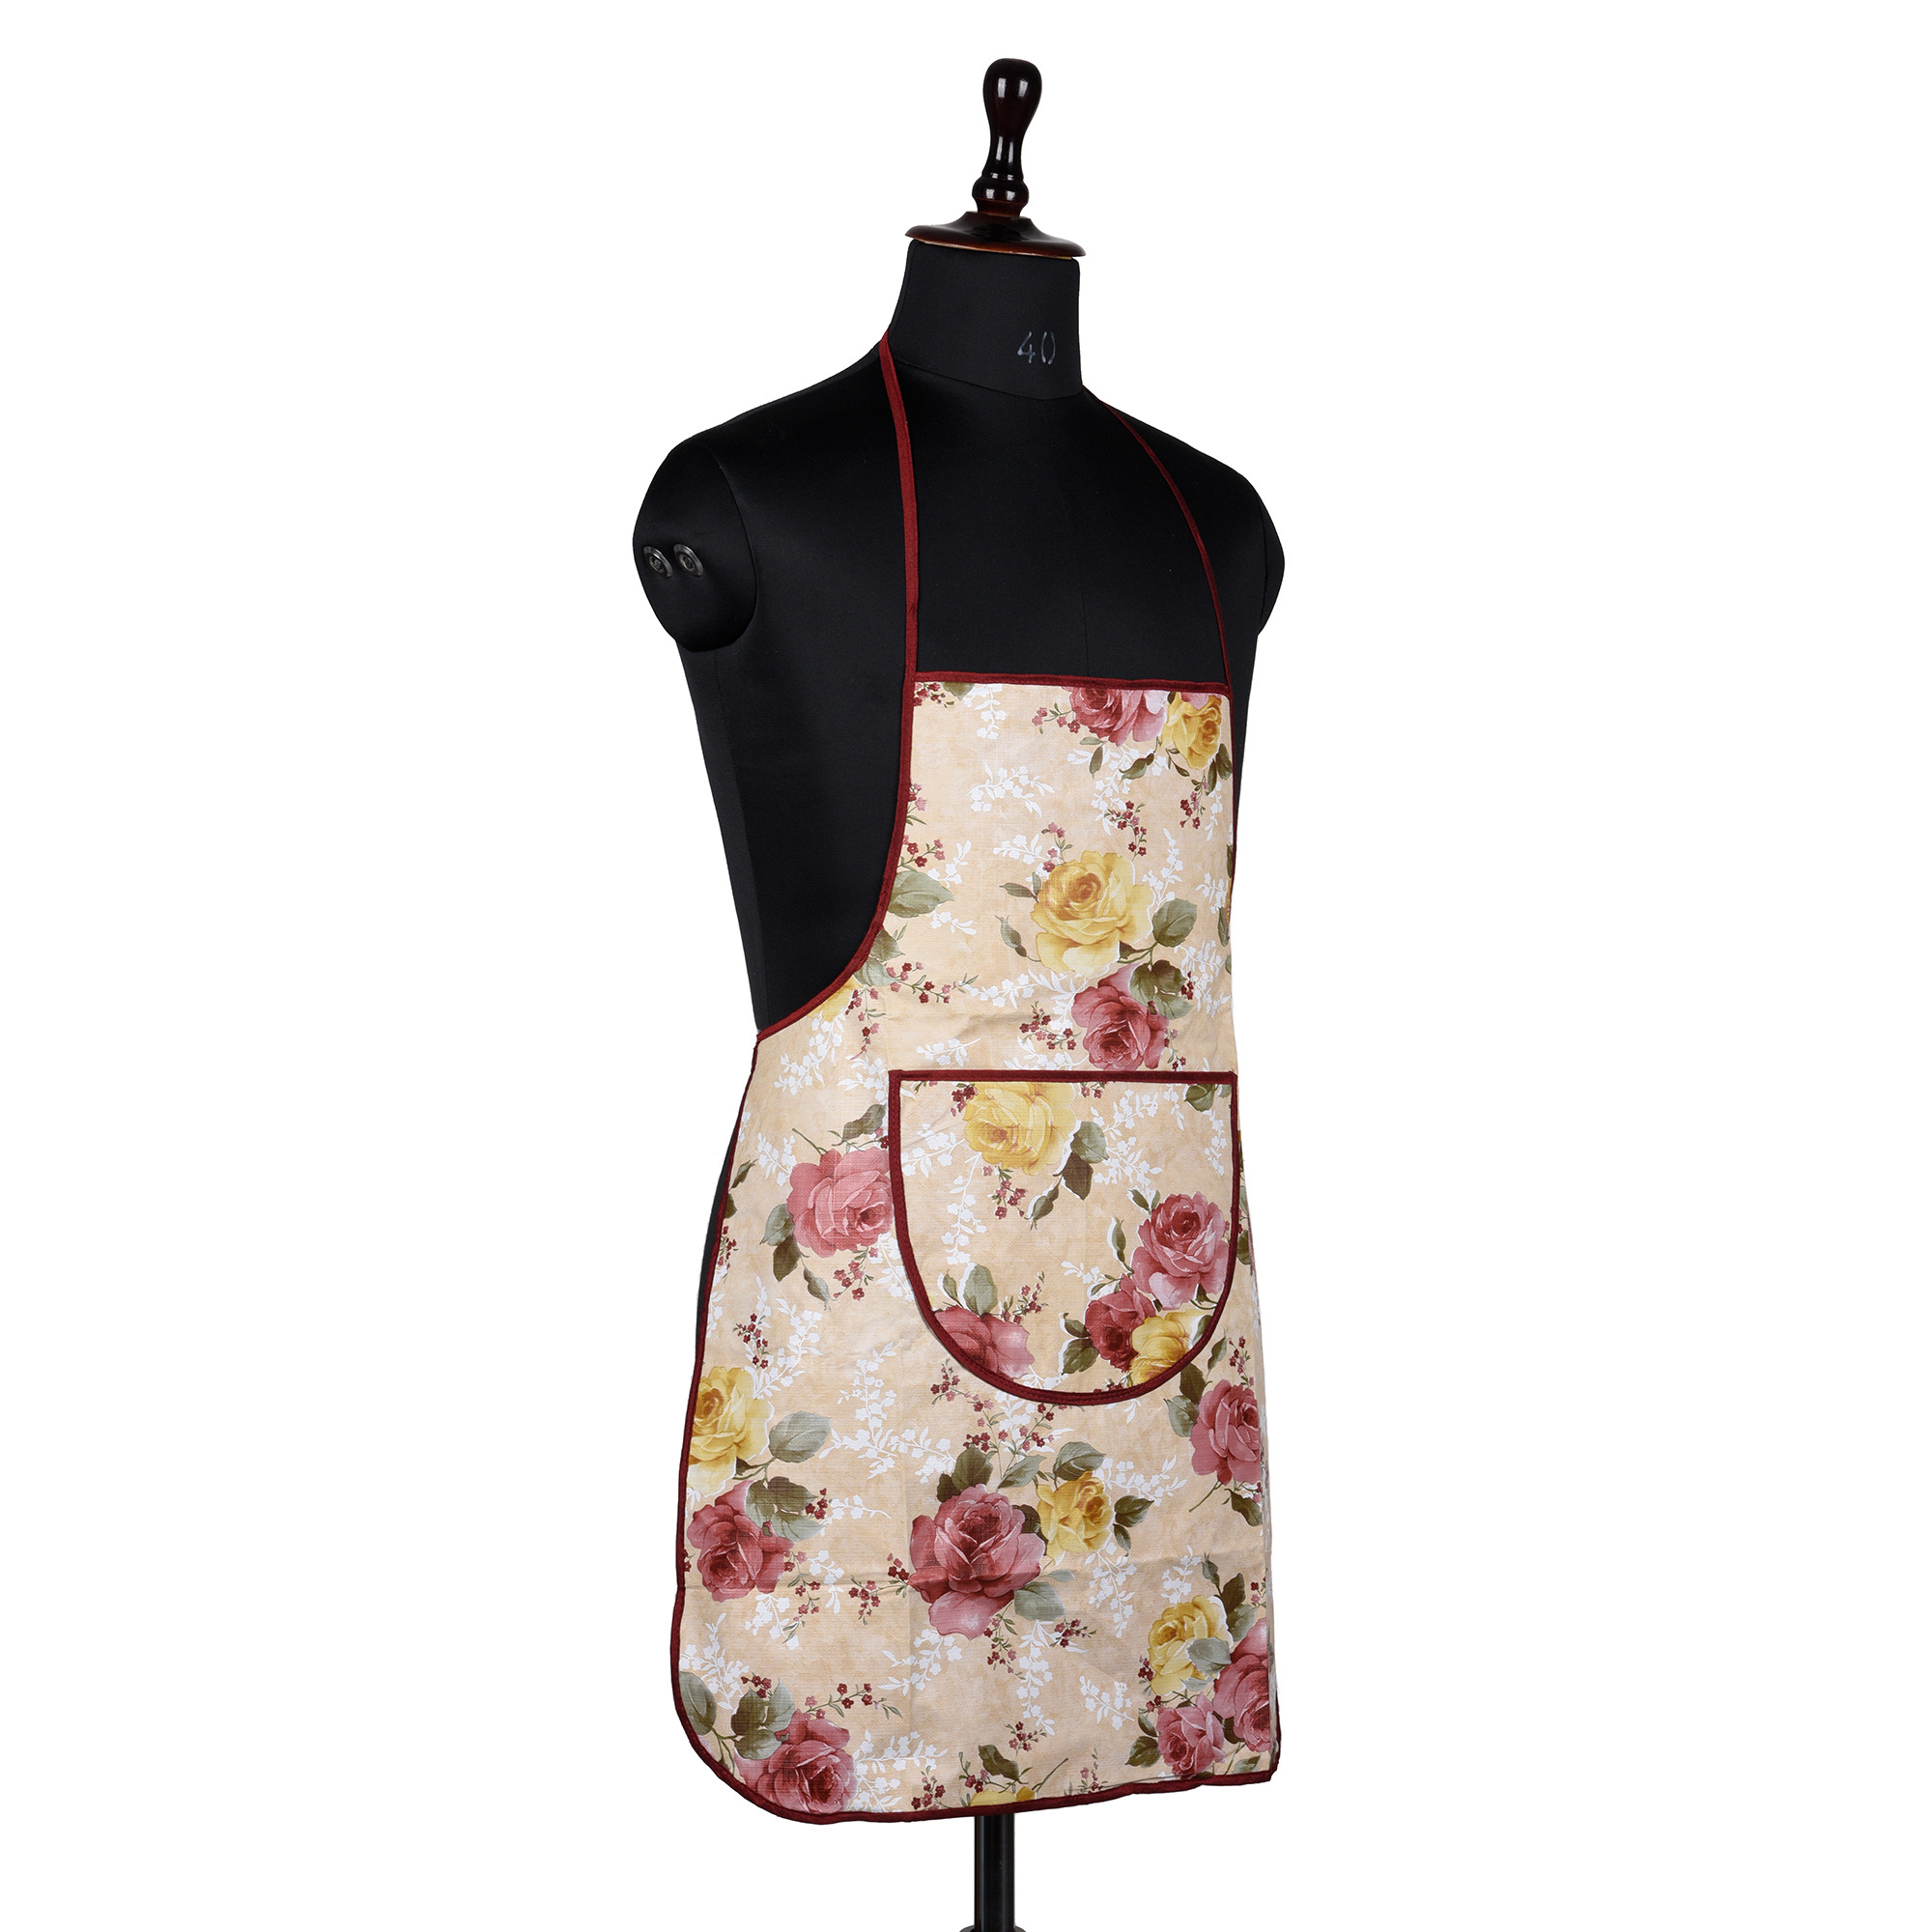 Kuber Industries Apron | PVC Cooking Kitchen Apron |  Center Pocket Apron for Restaurent | Flower Apron for Housewife | Chef Apron with Ties | Pack of 2 | Multicolor